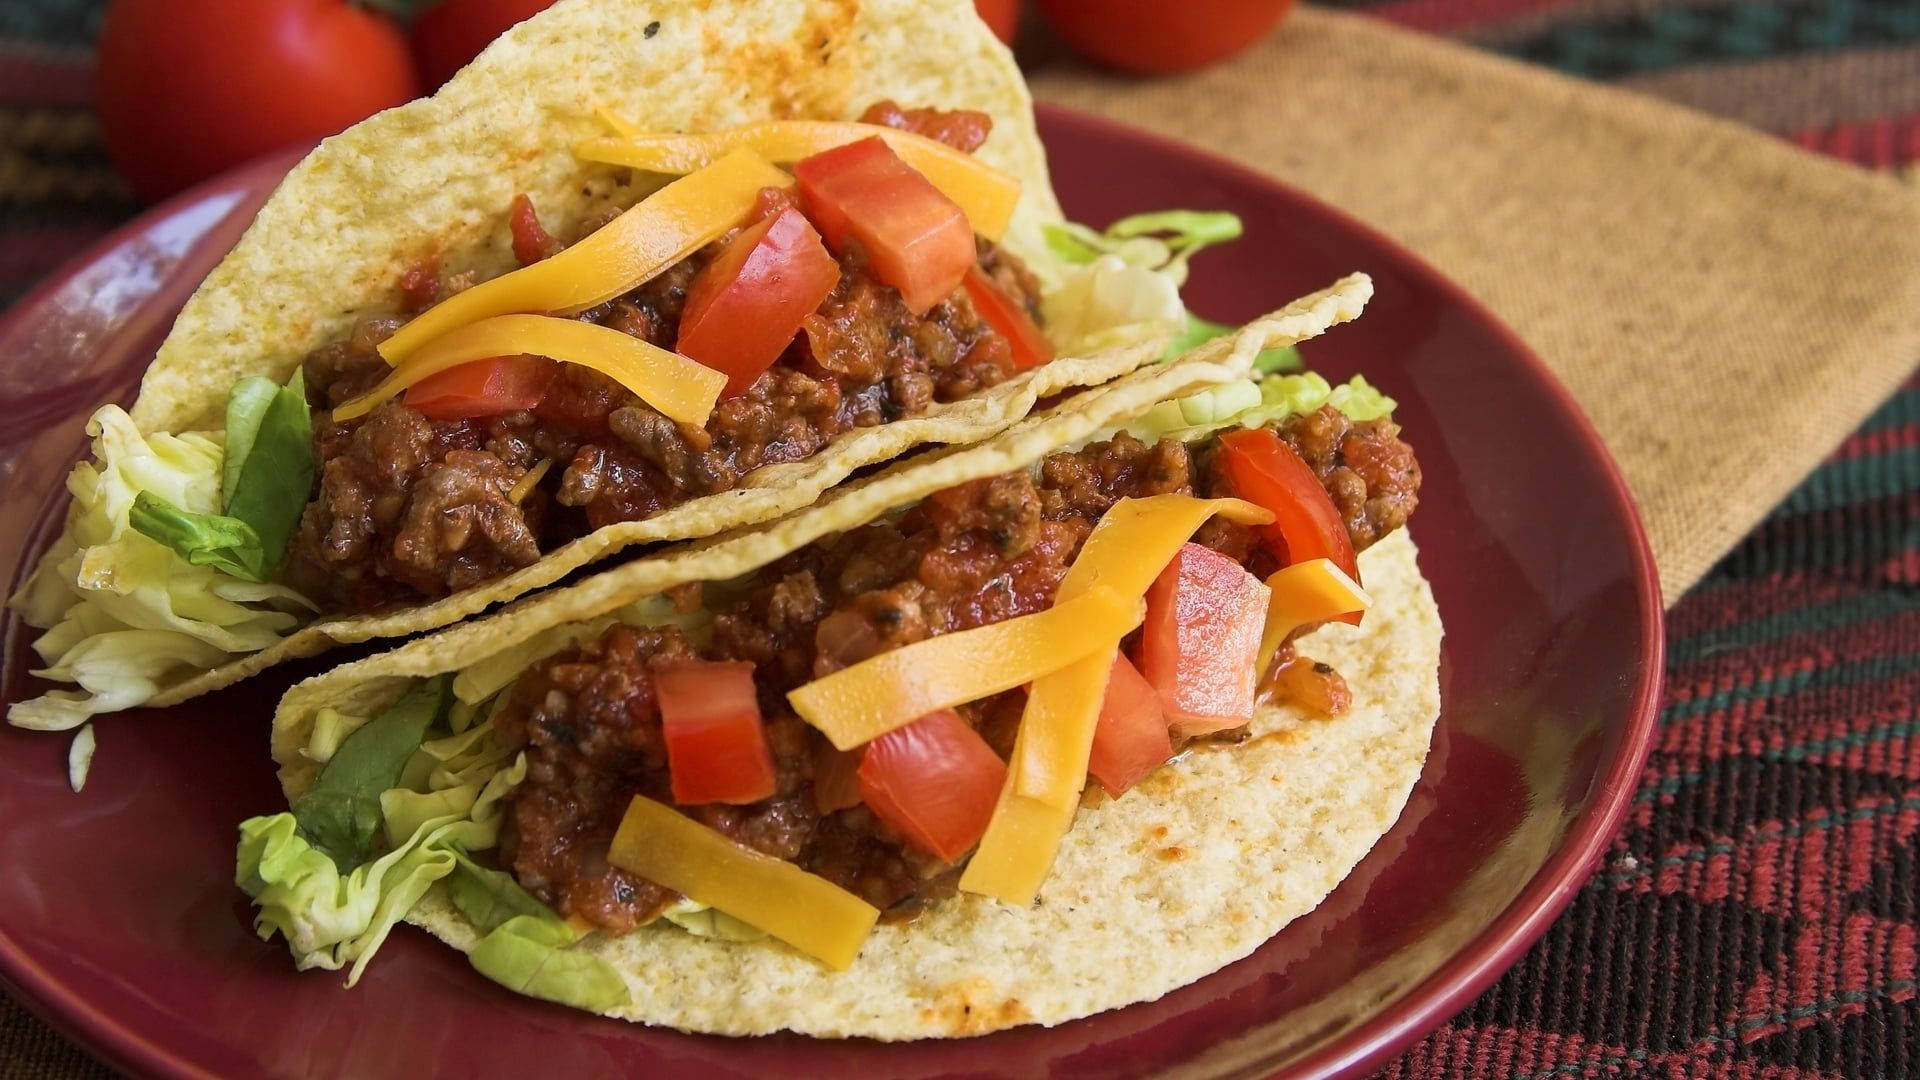 Authentic Flavors - Gourmet Tacos on a plate Wallpaper